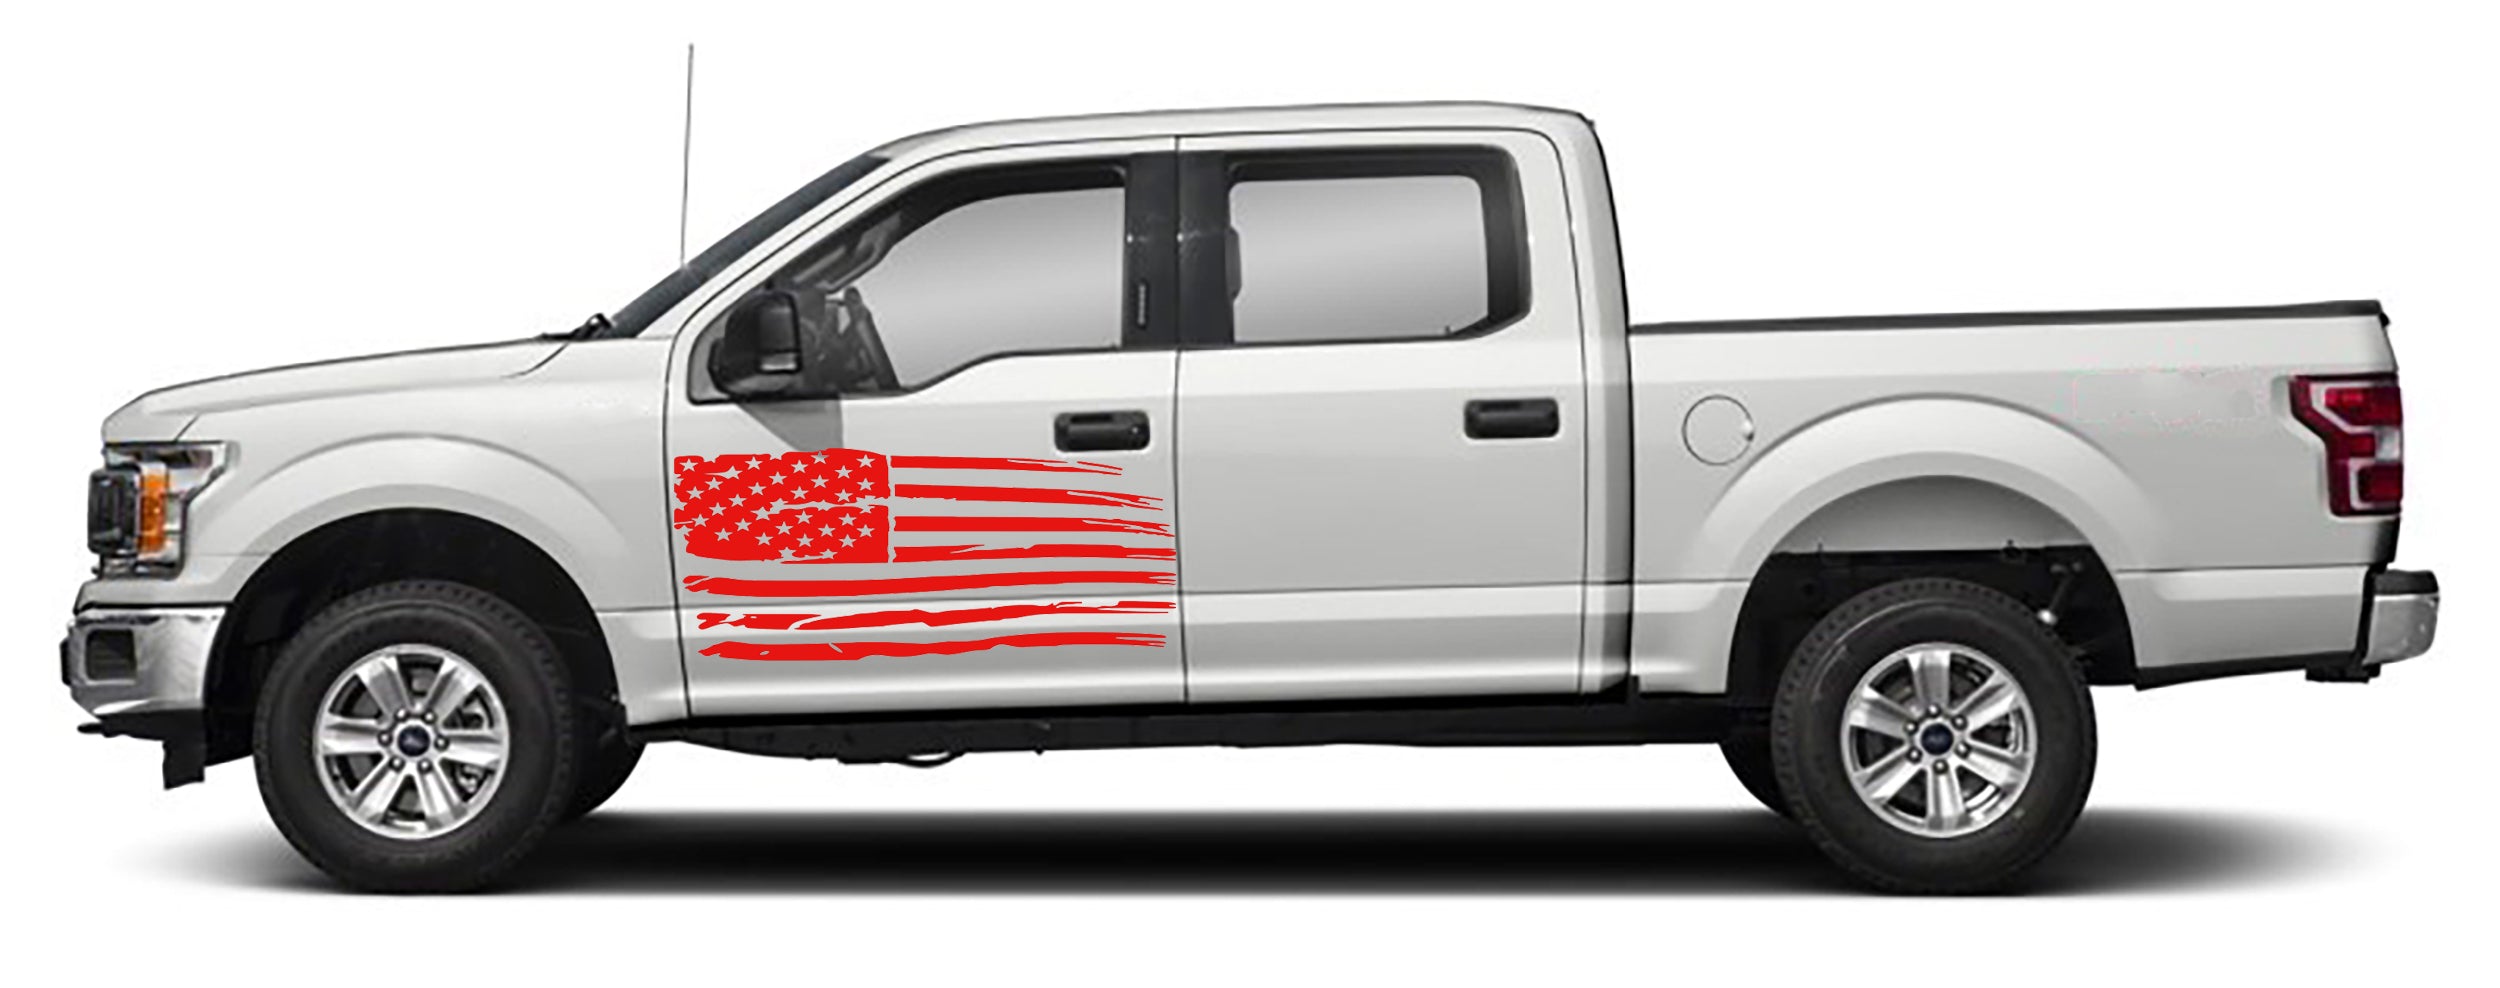 Ford F-150 USA Flag Door Decals (Pair) : Vinyl Graphics Kit Fits (2015-2020)